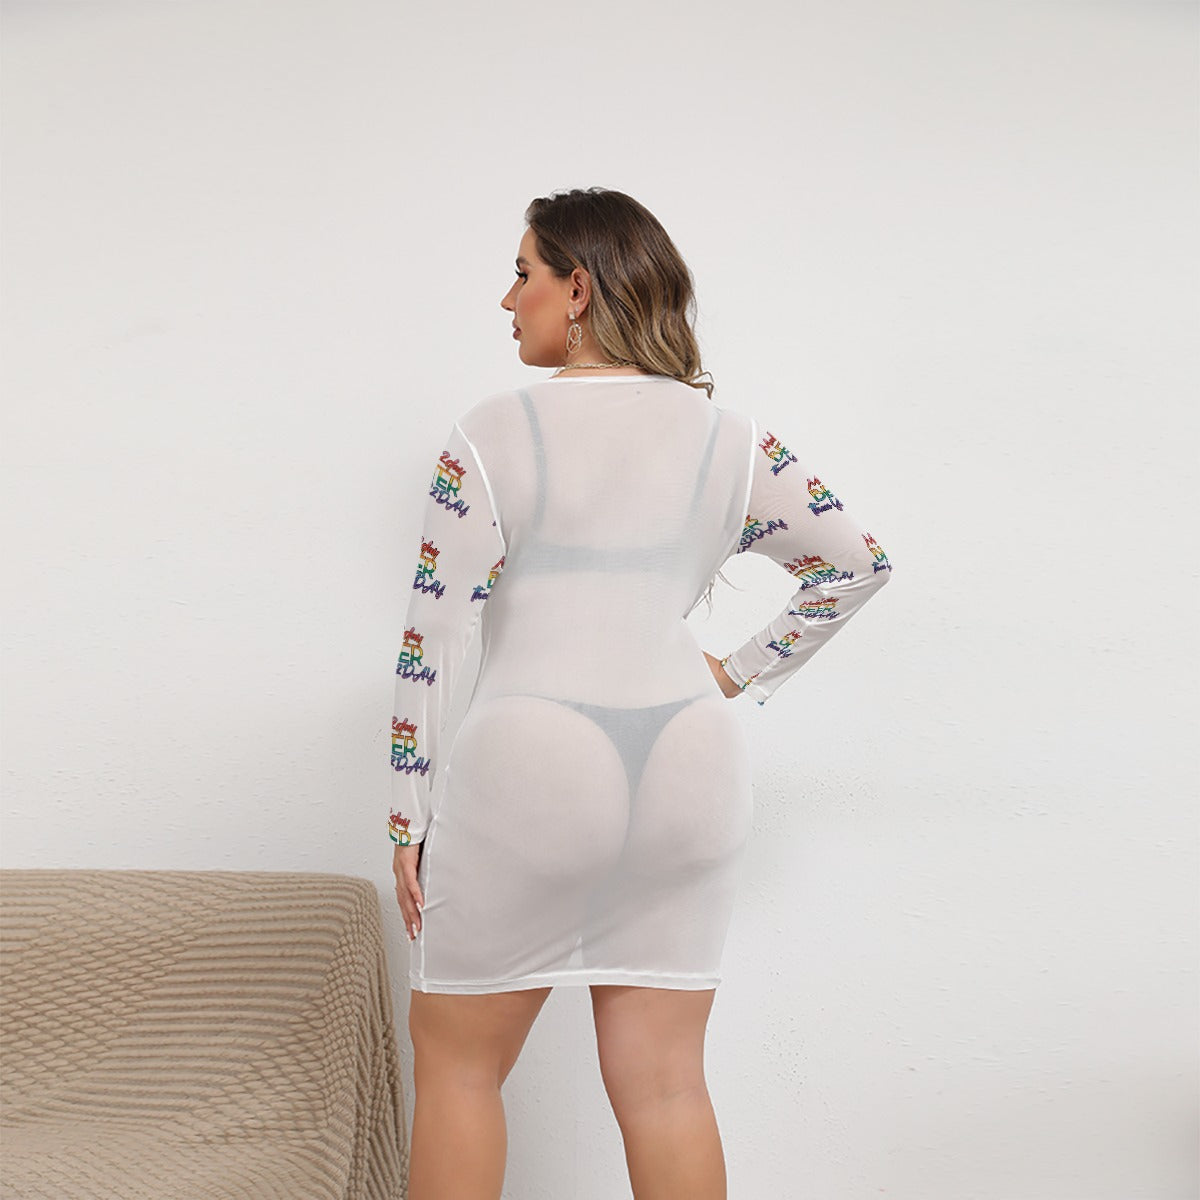 Women's Make 2Day Better Then YES2DAY Pride Mesh Dress (Plus Size)